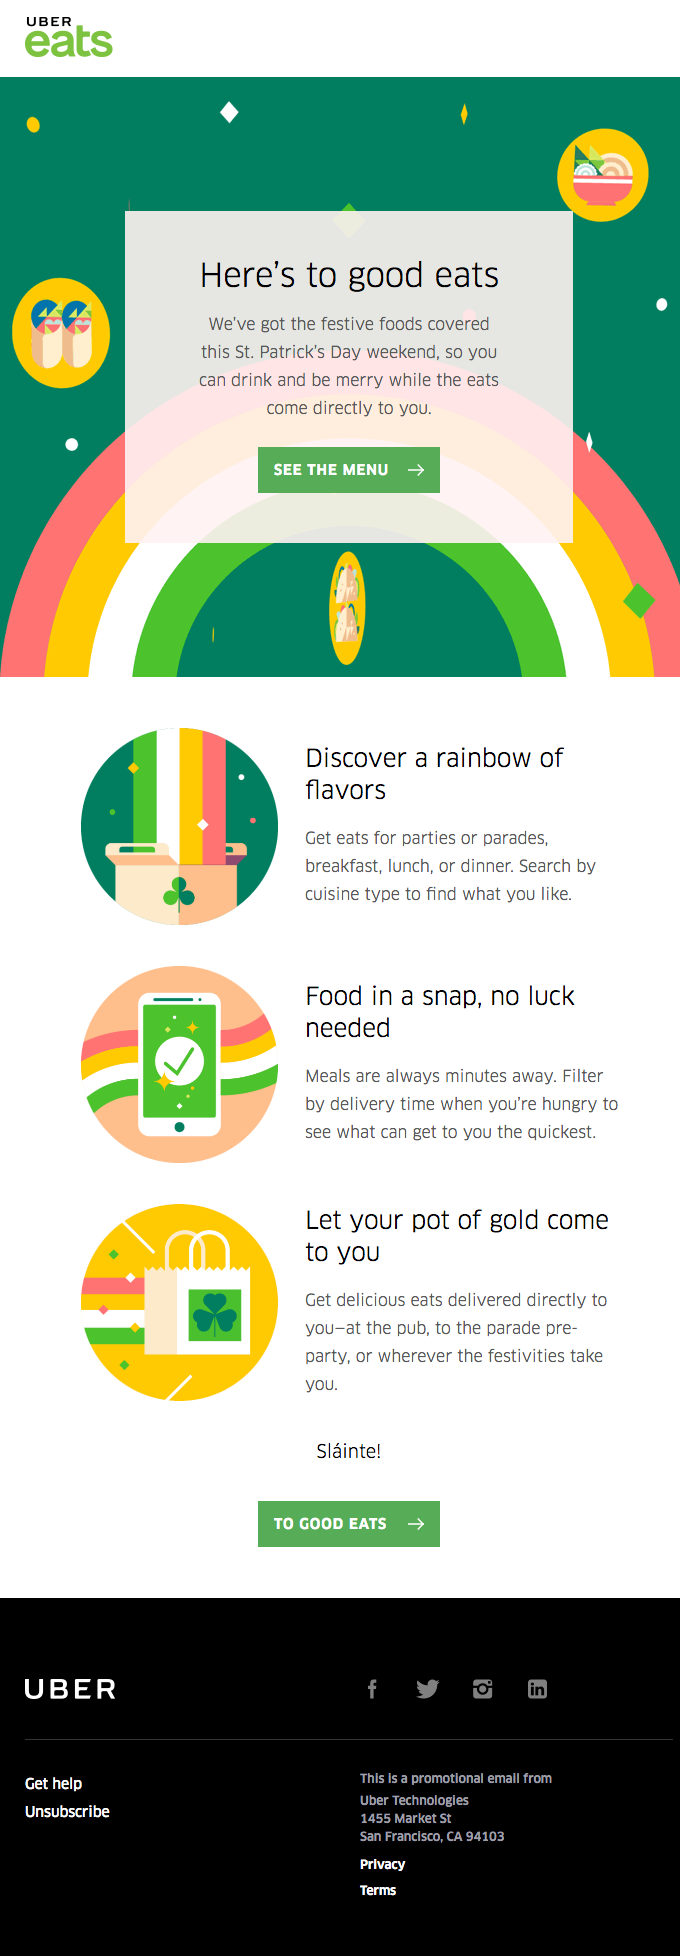 Celebrate St. Paddy’s Day with Uber Eats